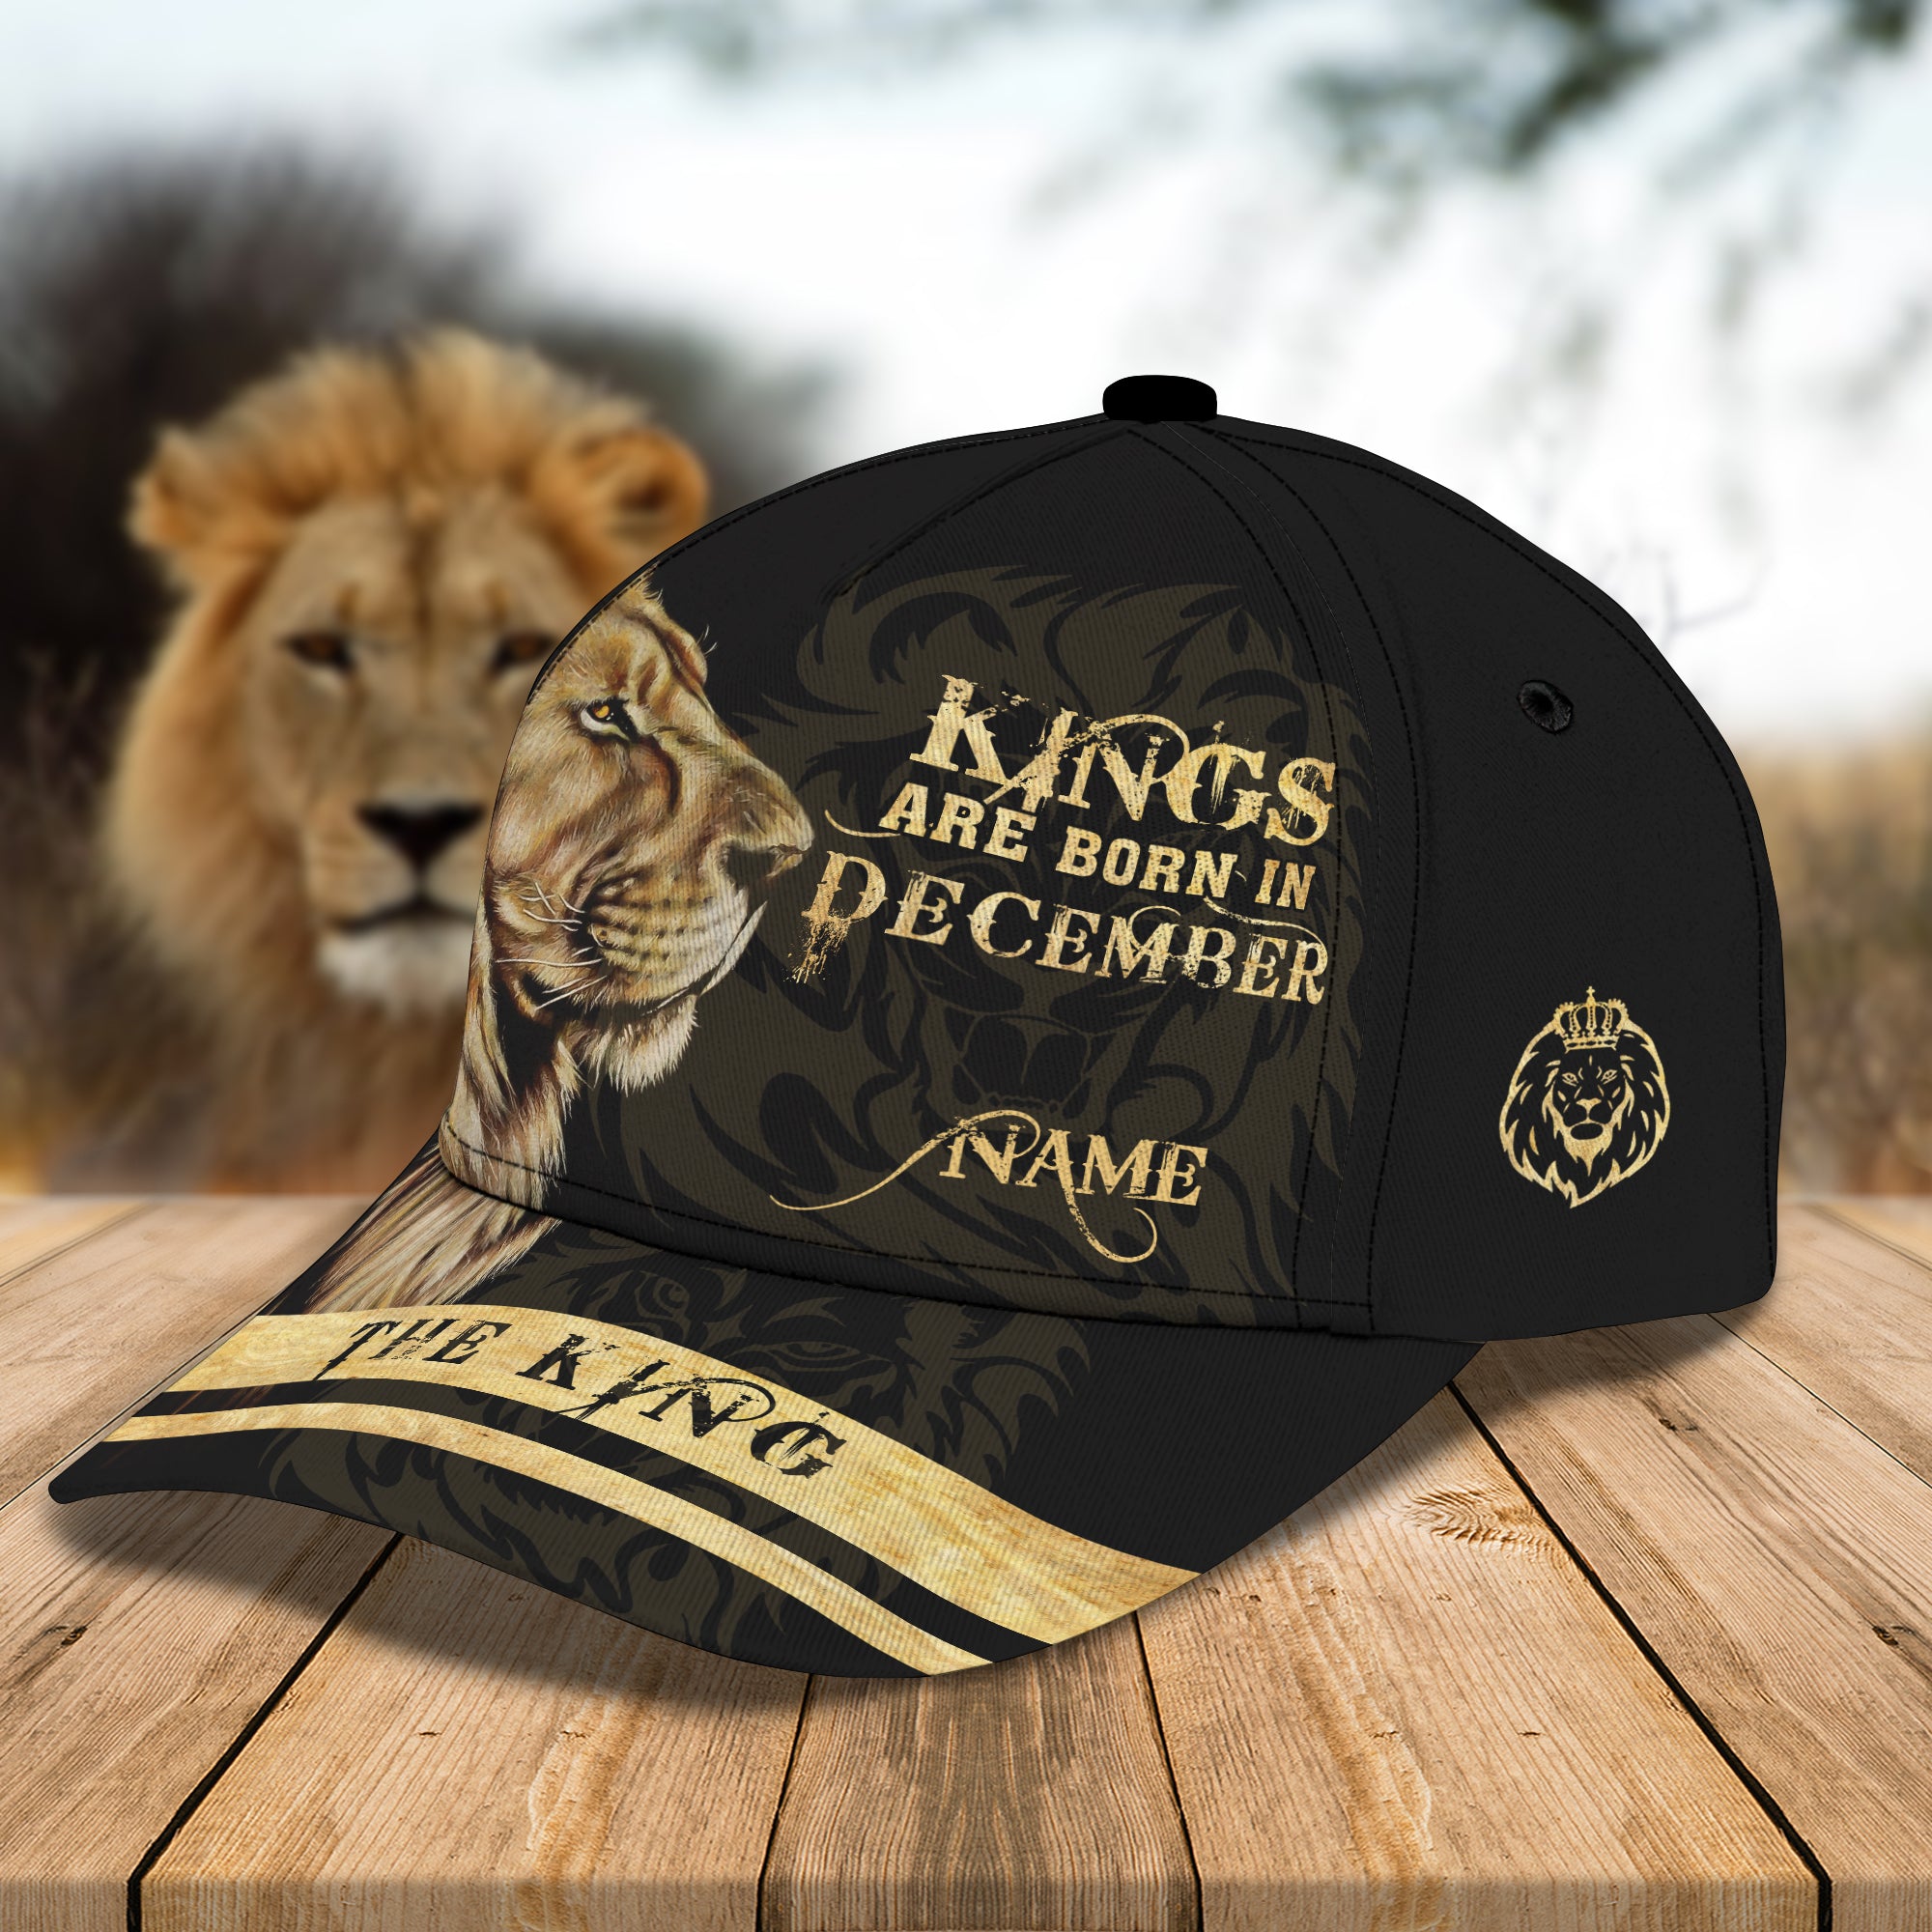 Kings Are Born In December- Personalized Name Cap 23 - Bhn97